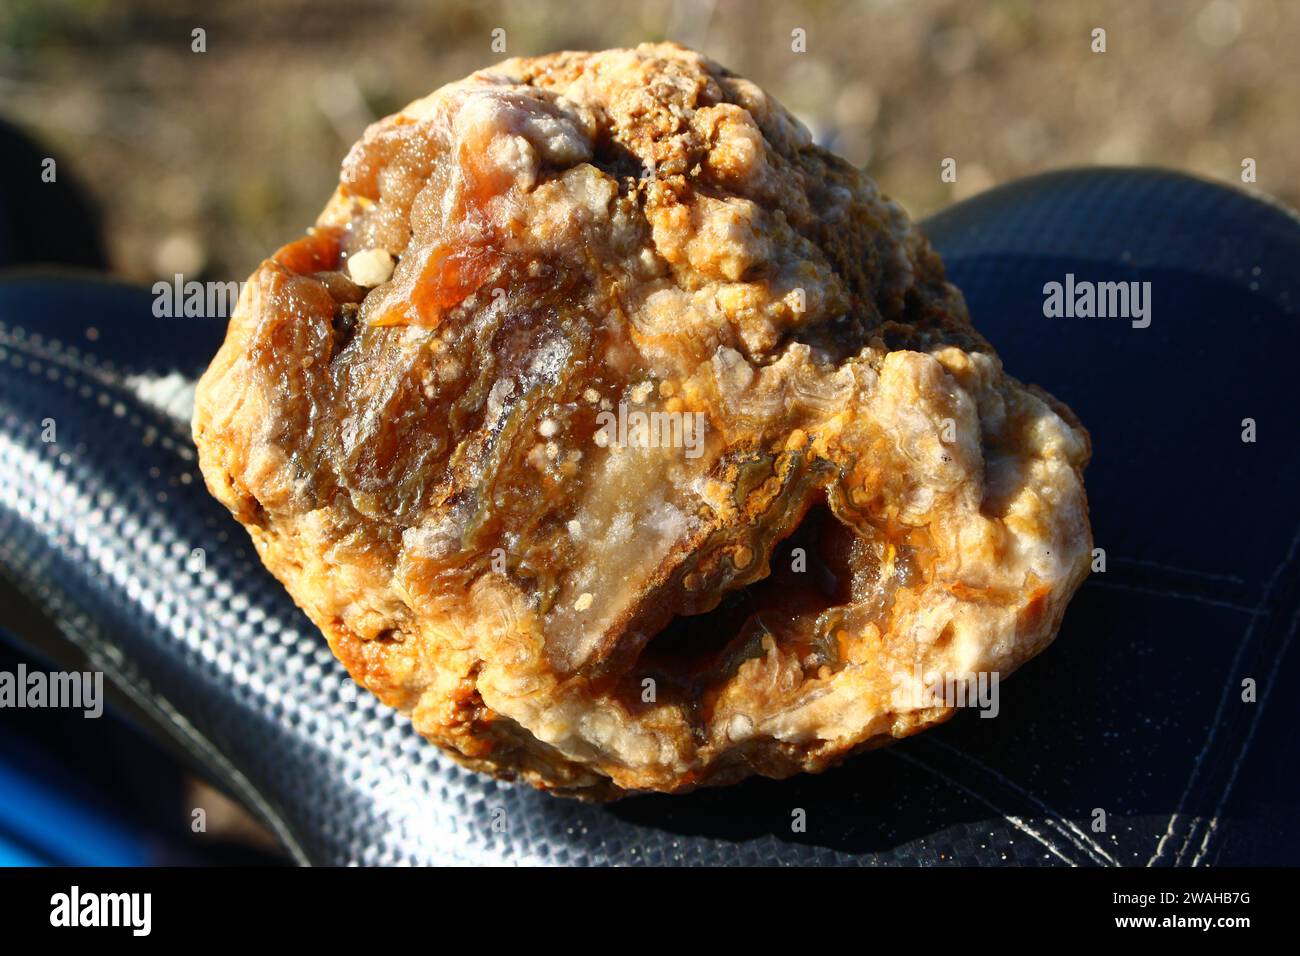 Raw unprocessed agate with a small geode found in nature. Kaluga region, Russia Stock Photo